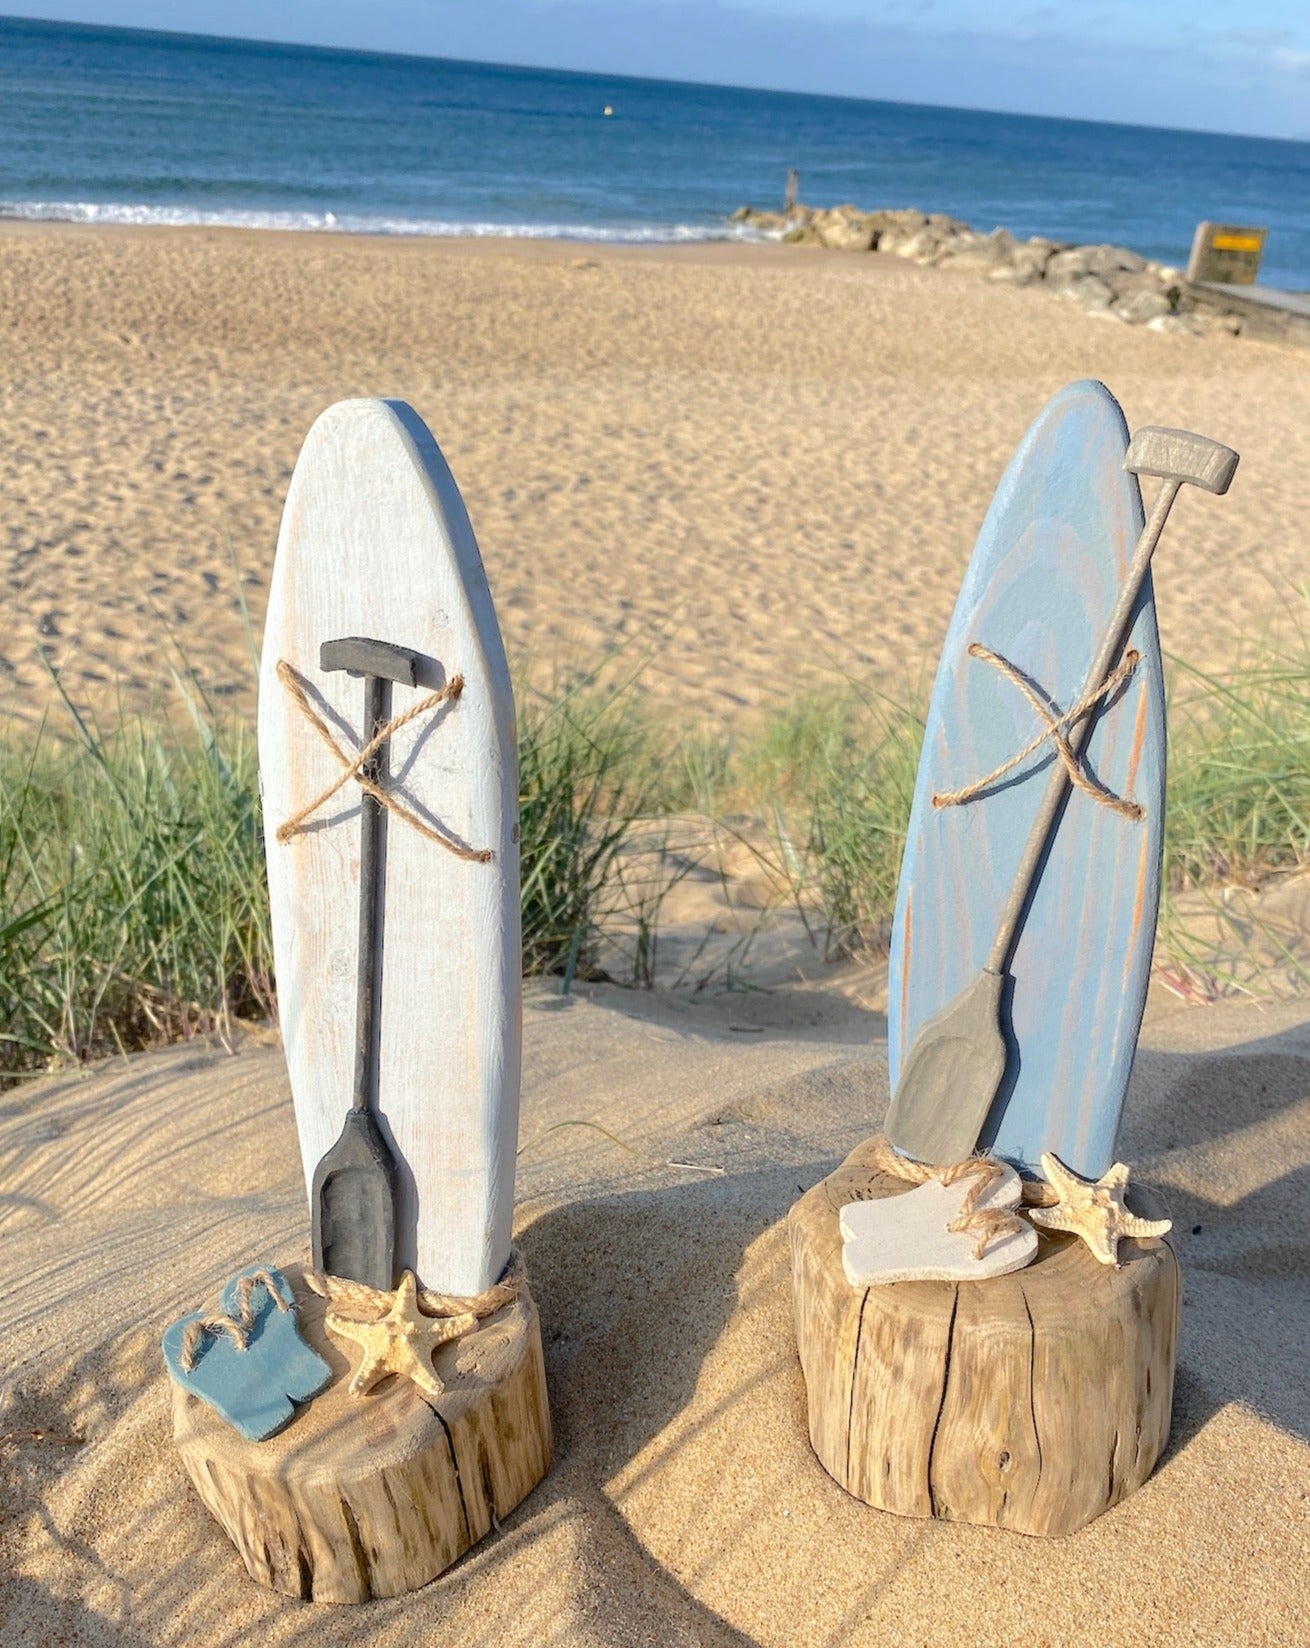 Paddleboard on Driftwood Décor with Blue Flip flops - Drift Craft by Jo